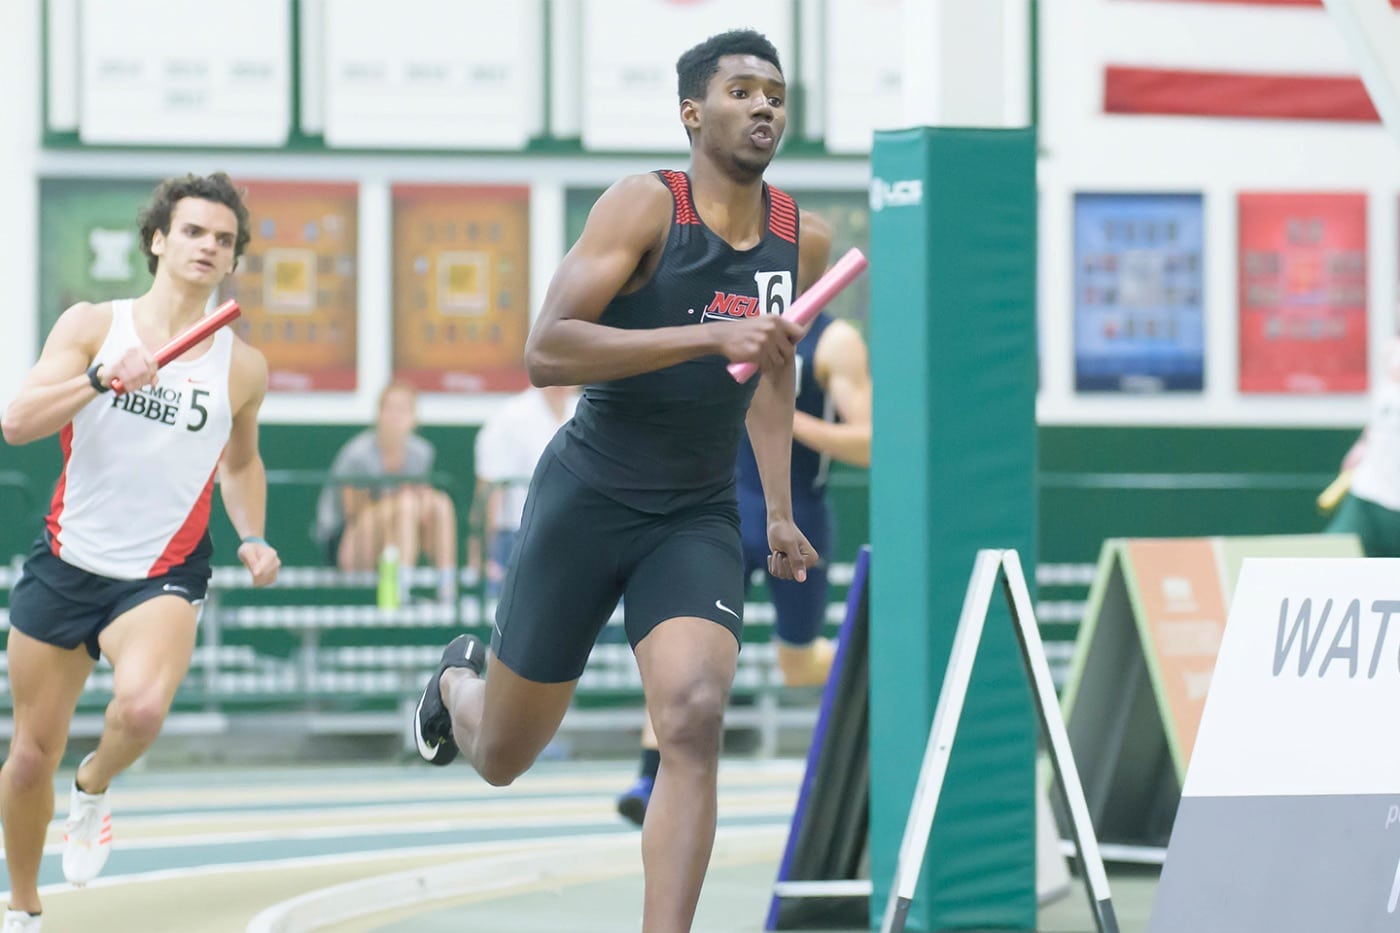 Richardson ran his final 200-meter race of the indoor calendar and clocked a time of 21.60-seconds at the prelims for the NCAA Division II National Championships.